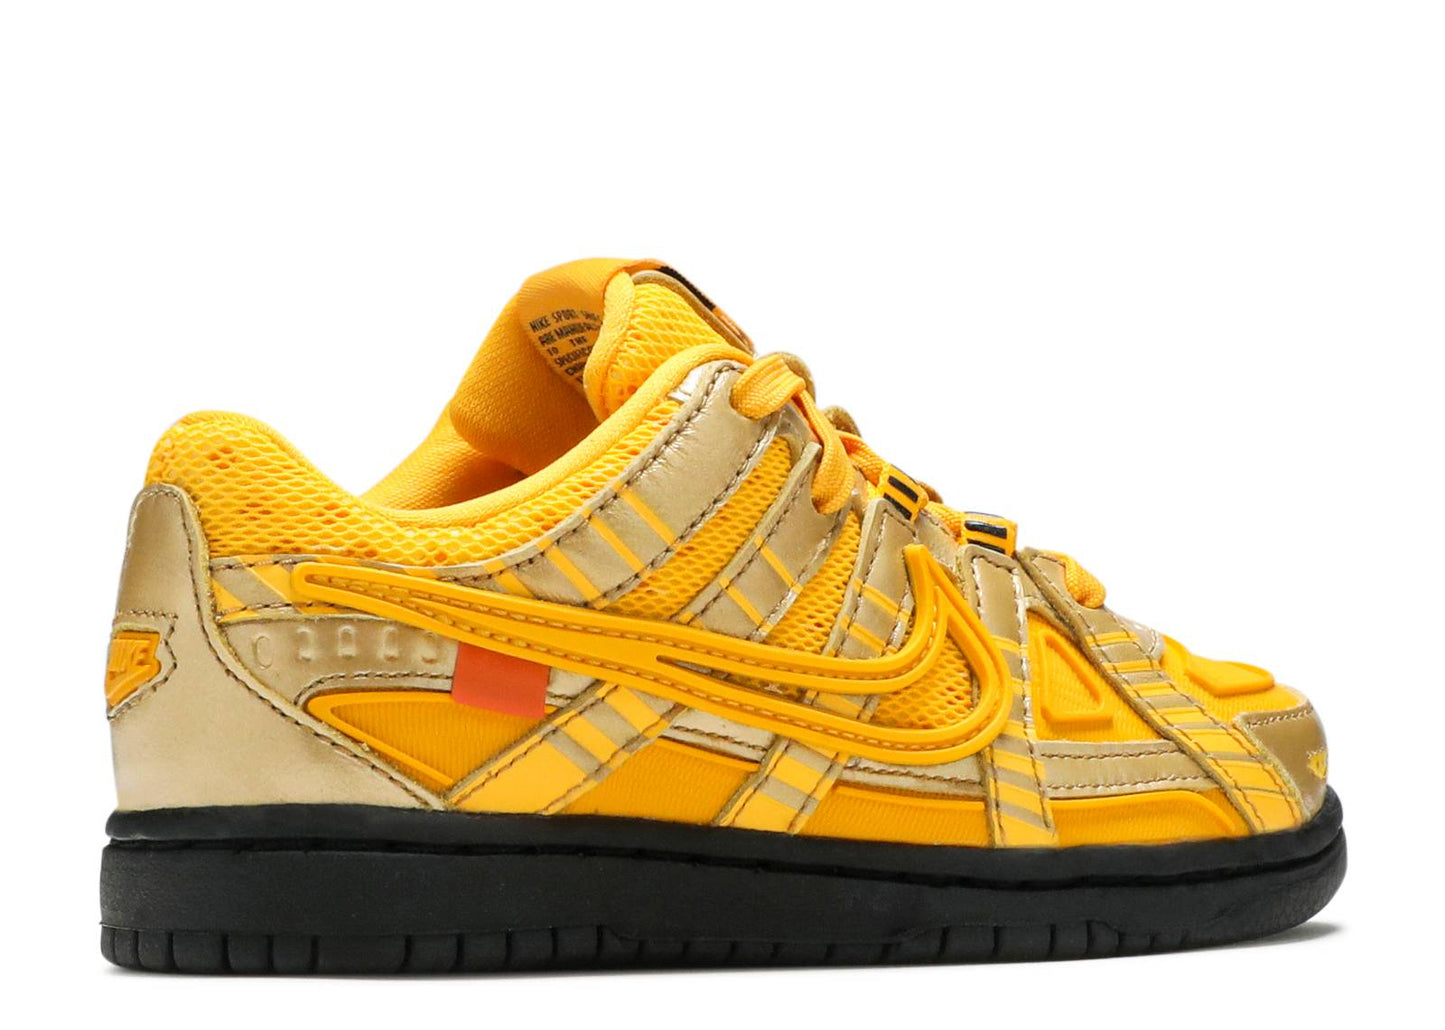 Off White x Nike Air Rubber Dunk PS "University Gold"